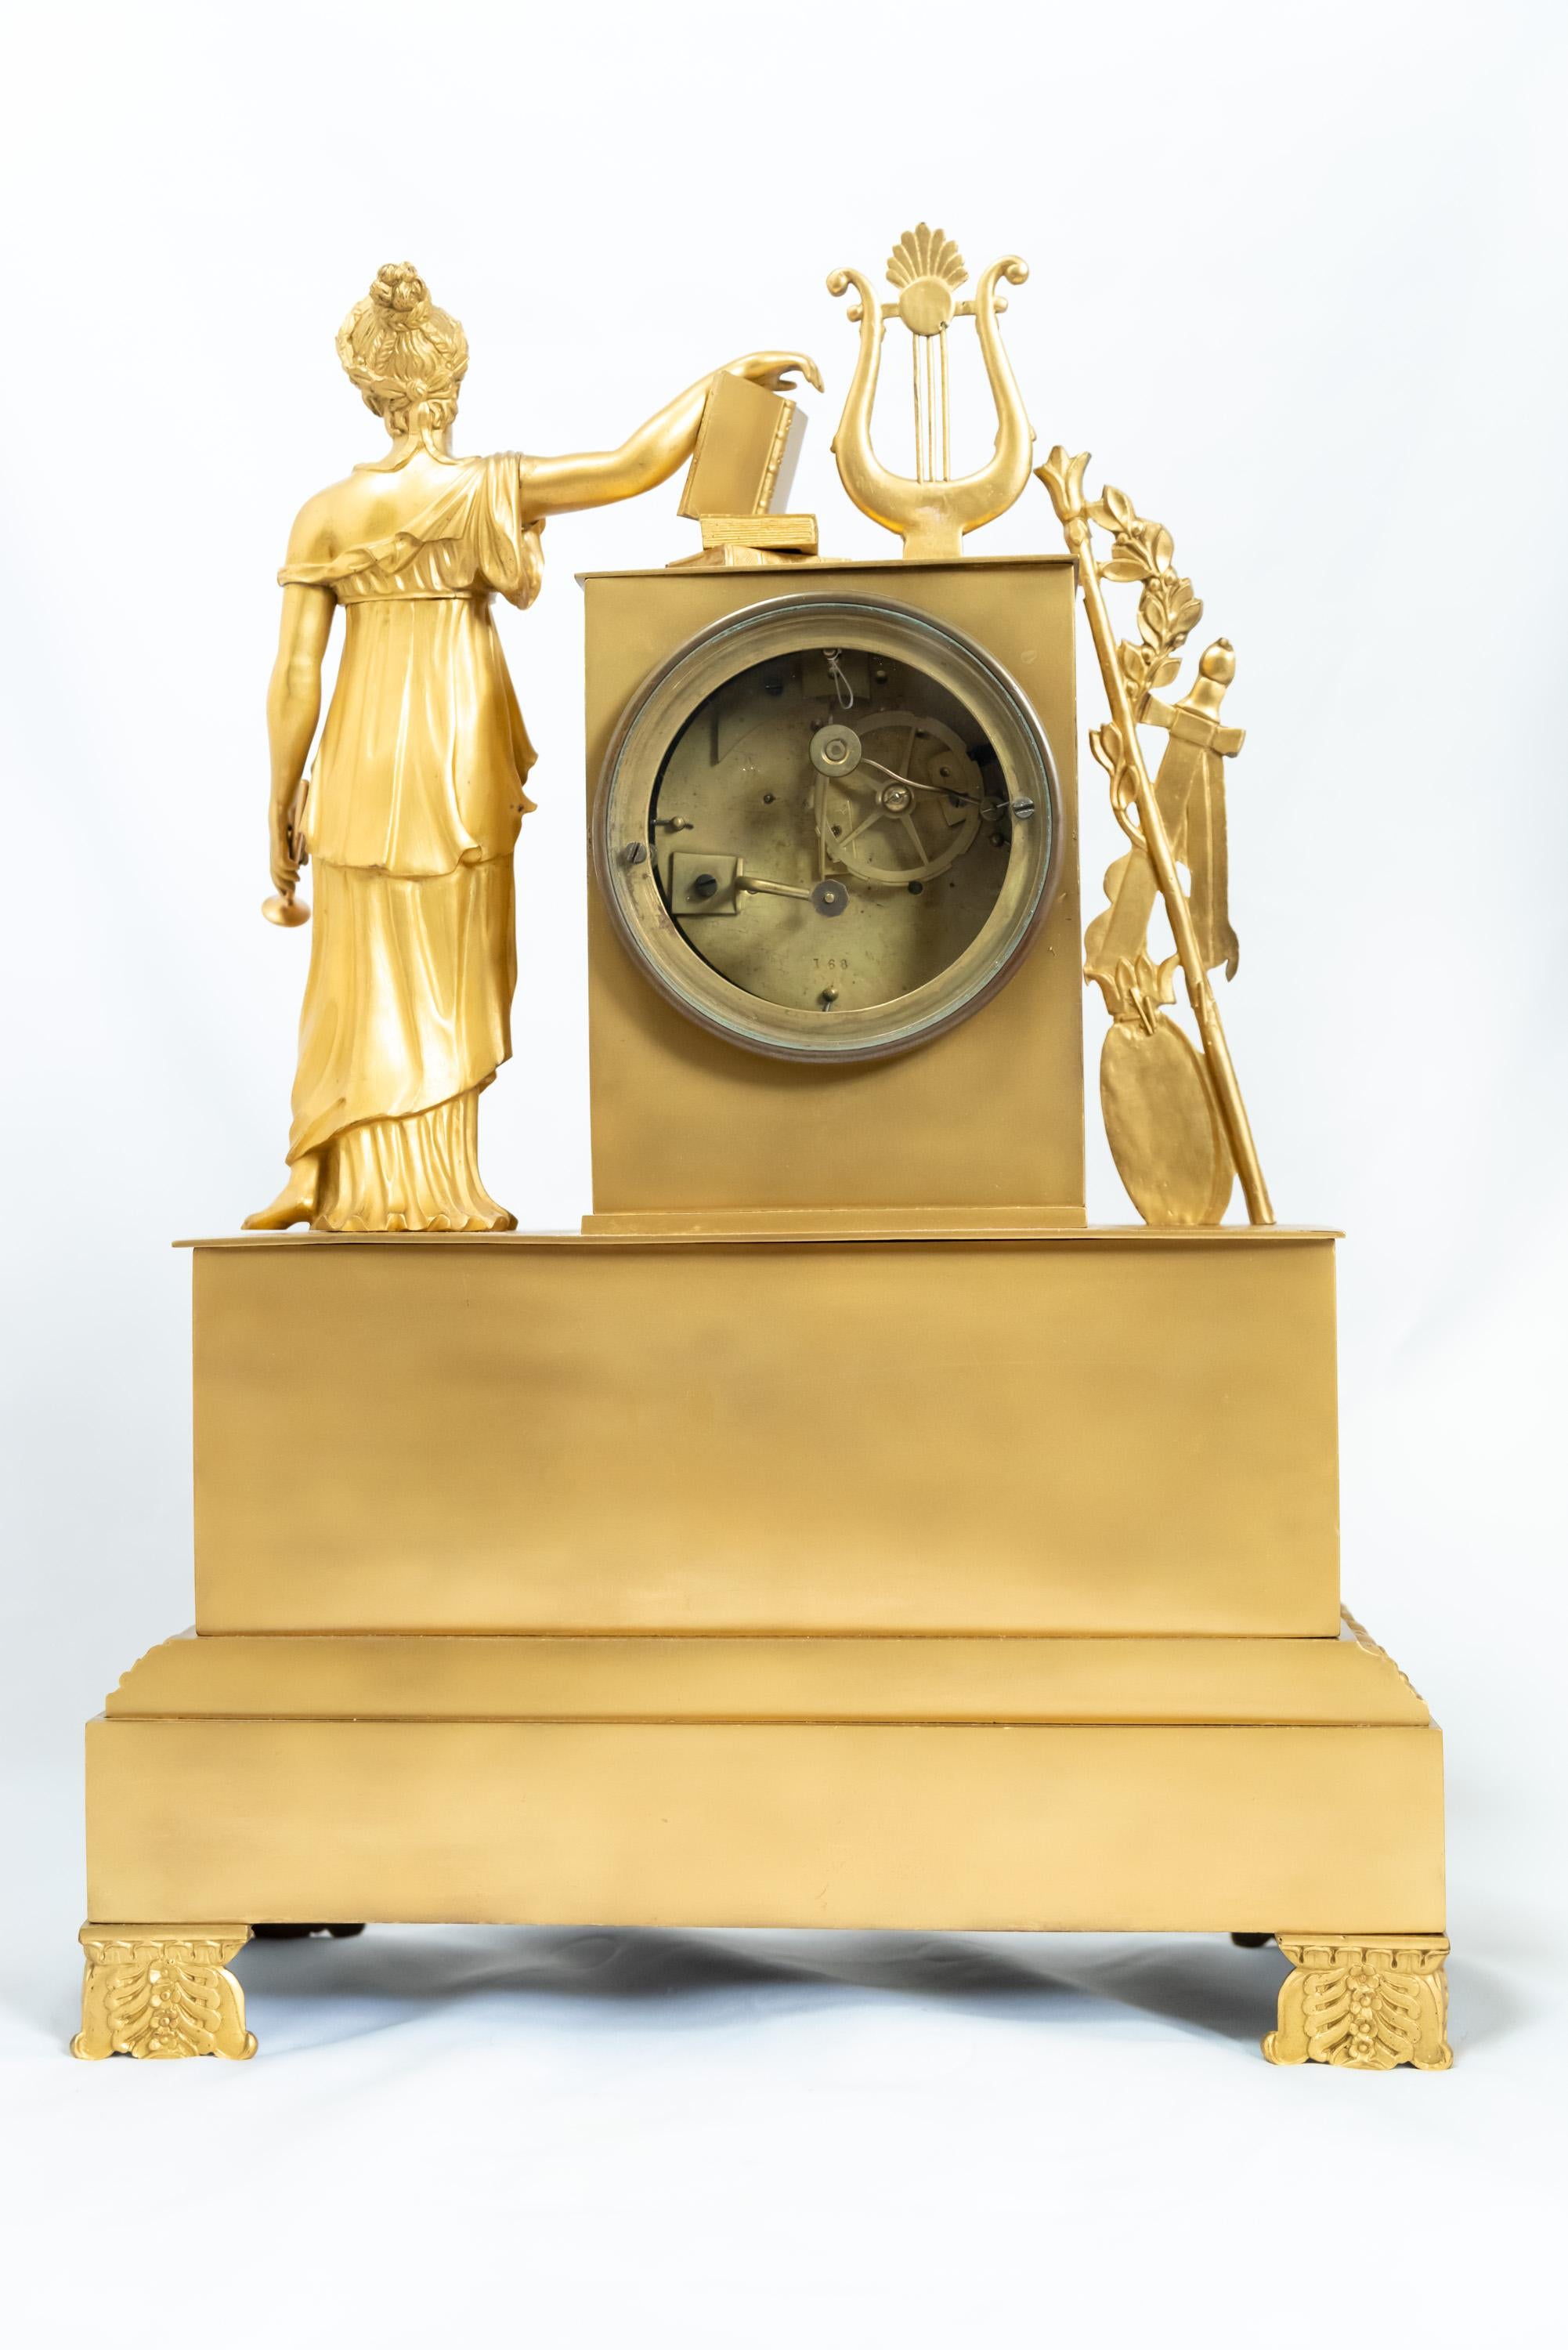 A Restauration Era Fire-Gilt Mantle Clock with Figures of Venus and Cupid In Good Condition For Sale In 263-0031, JP